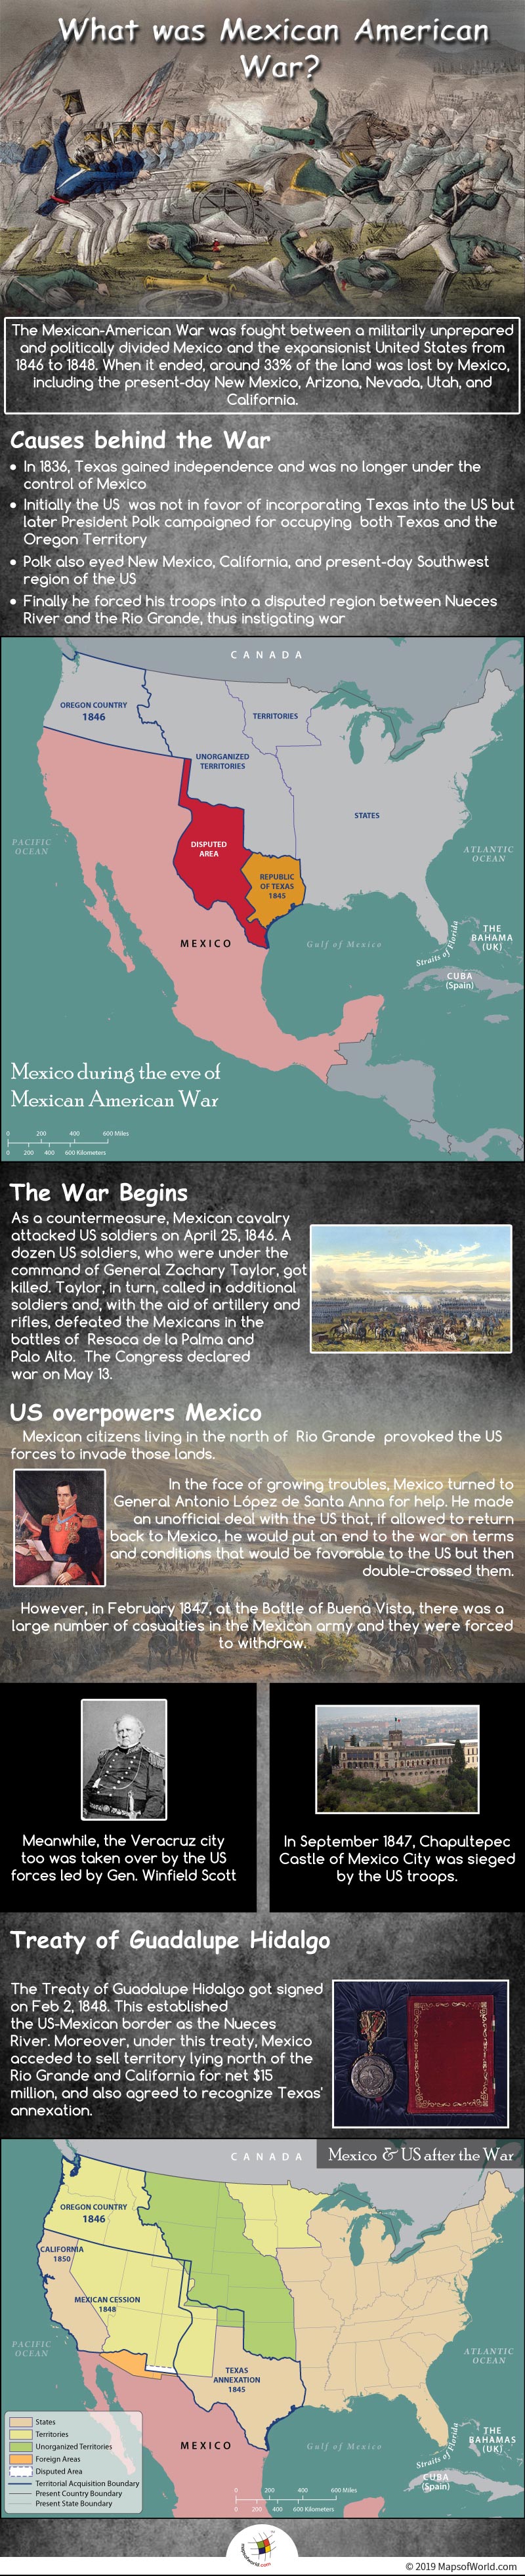 Infographic Showing Details of The Mexican American War